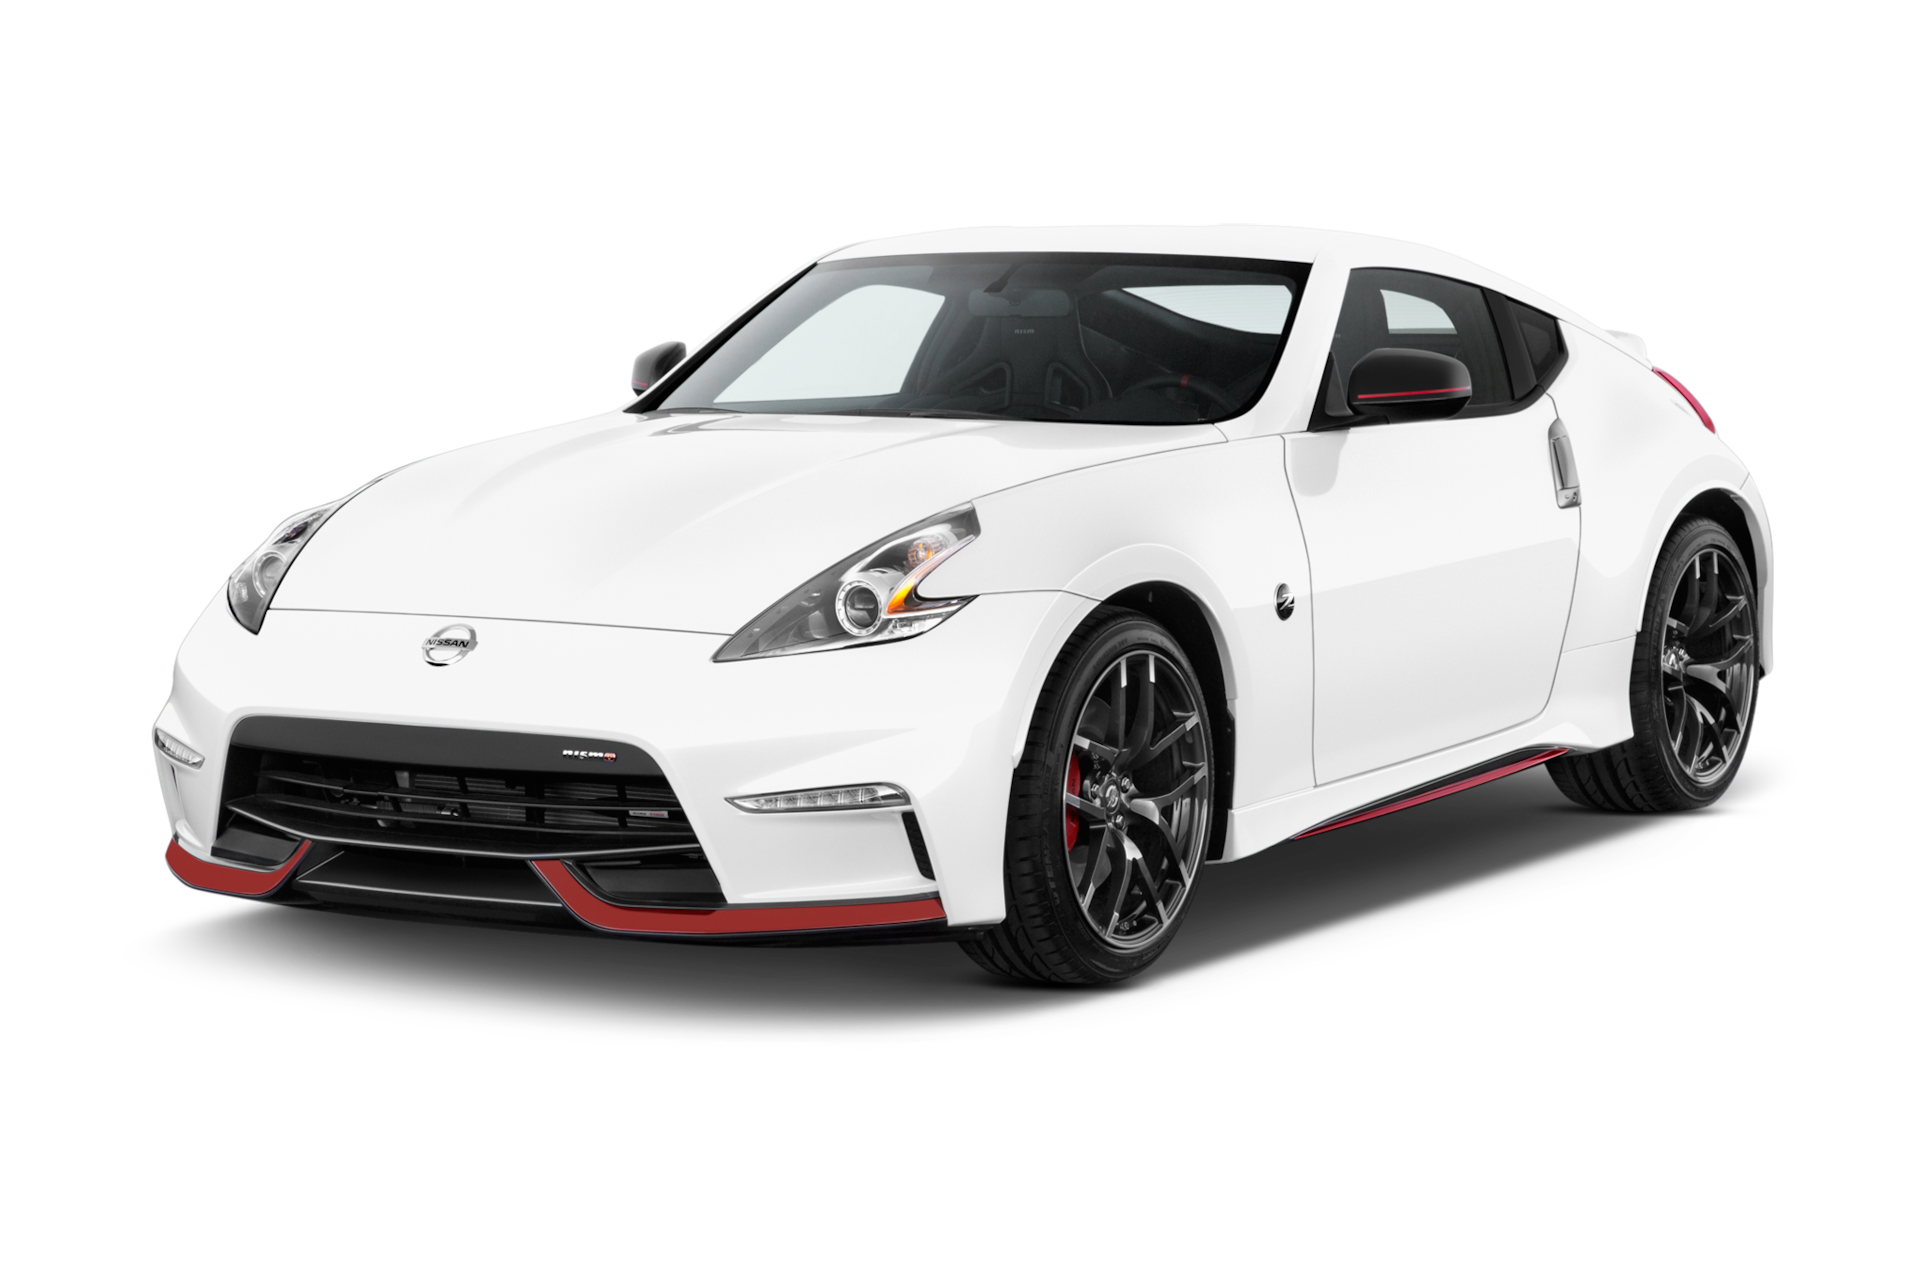 2019 Nissan 370Z Prices, Reviews, and Photos - MotorTrend